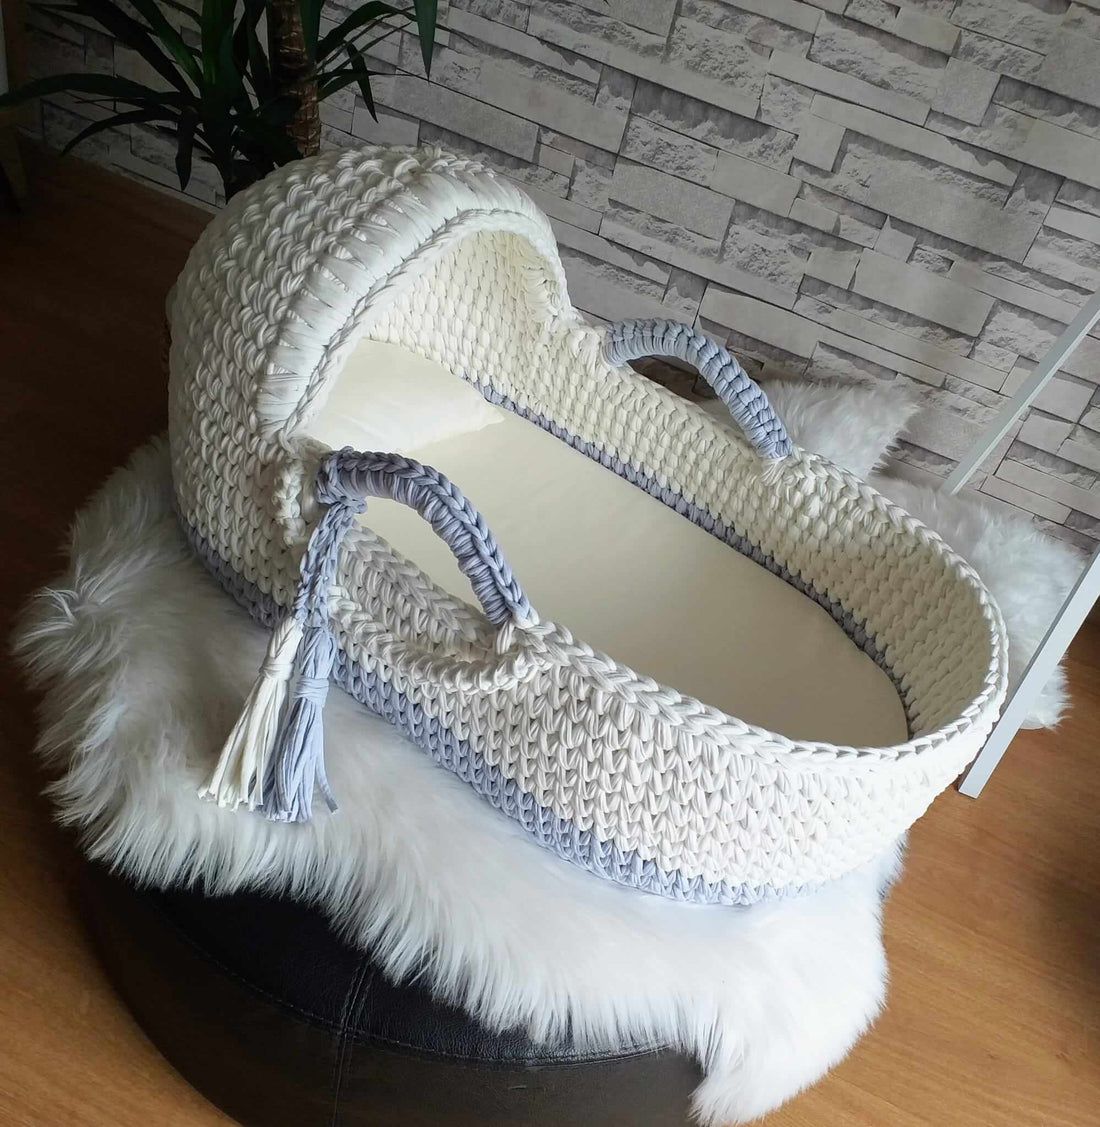 Woven Baby Bed, Baby Shower Gift, Moses Basket